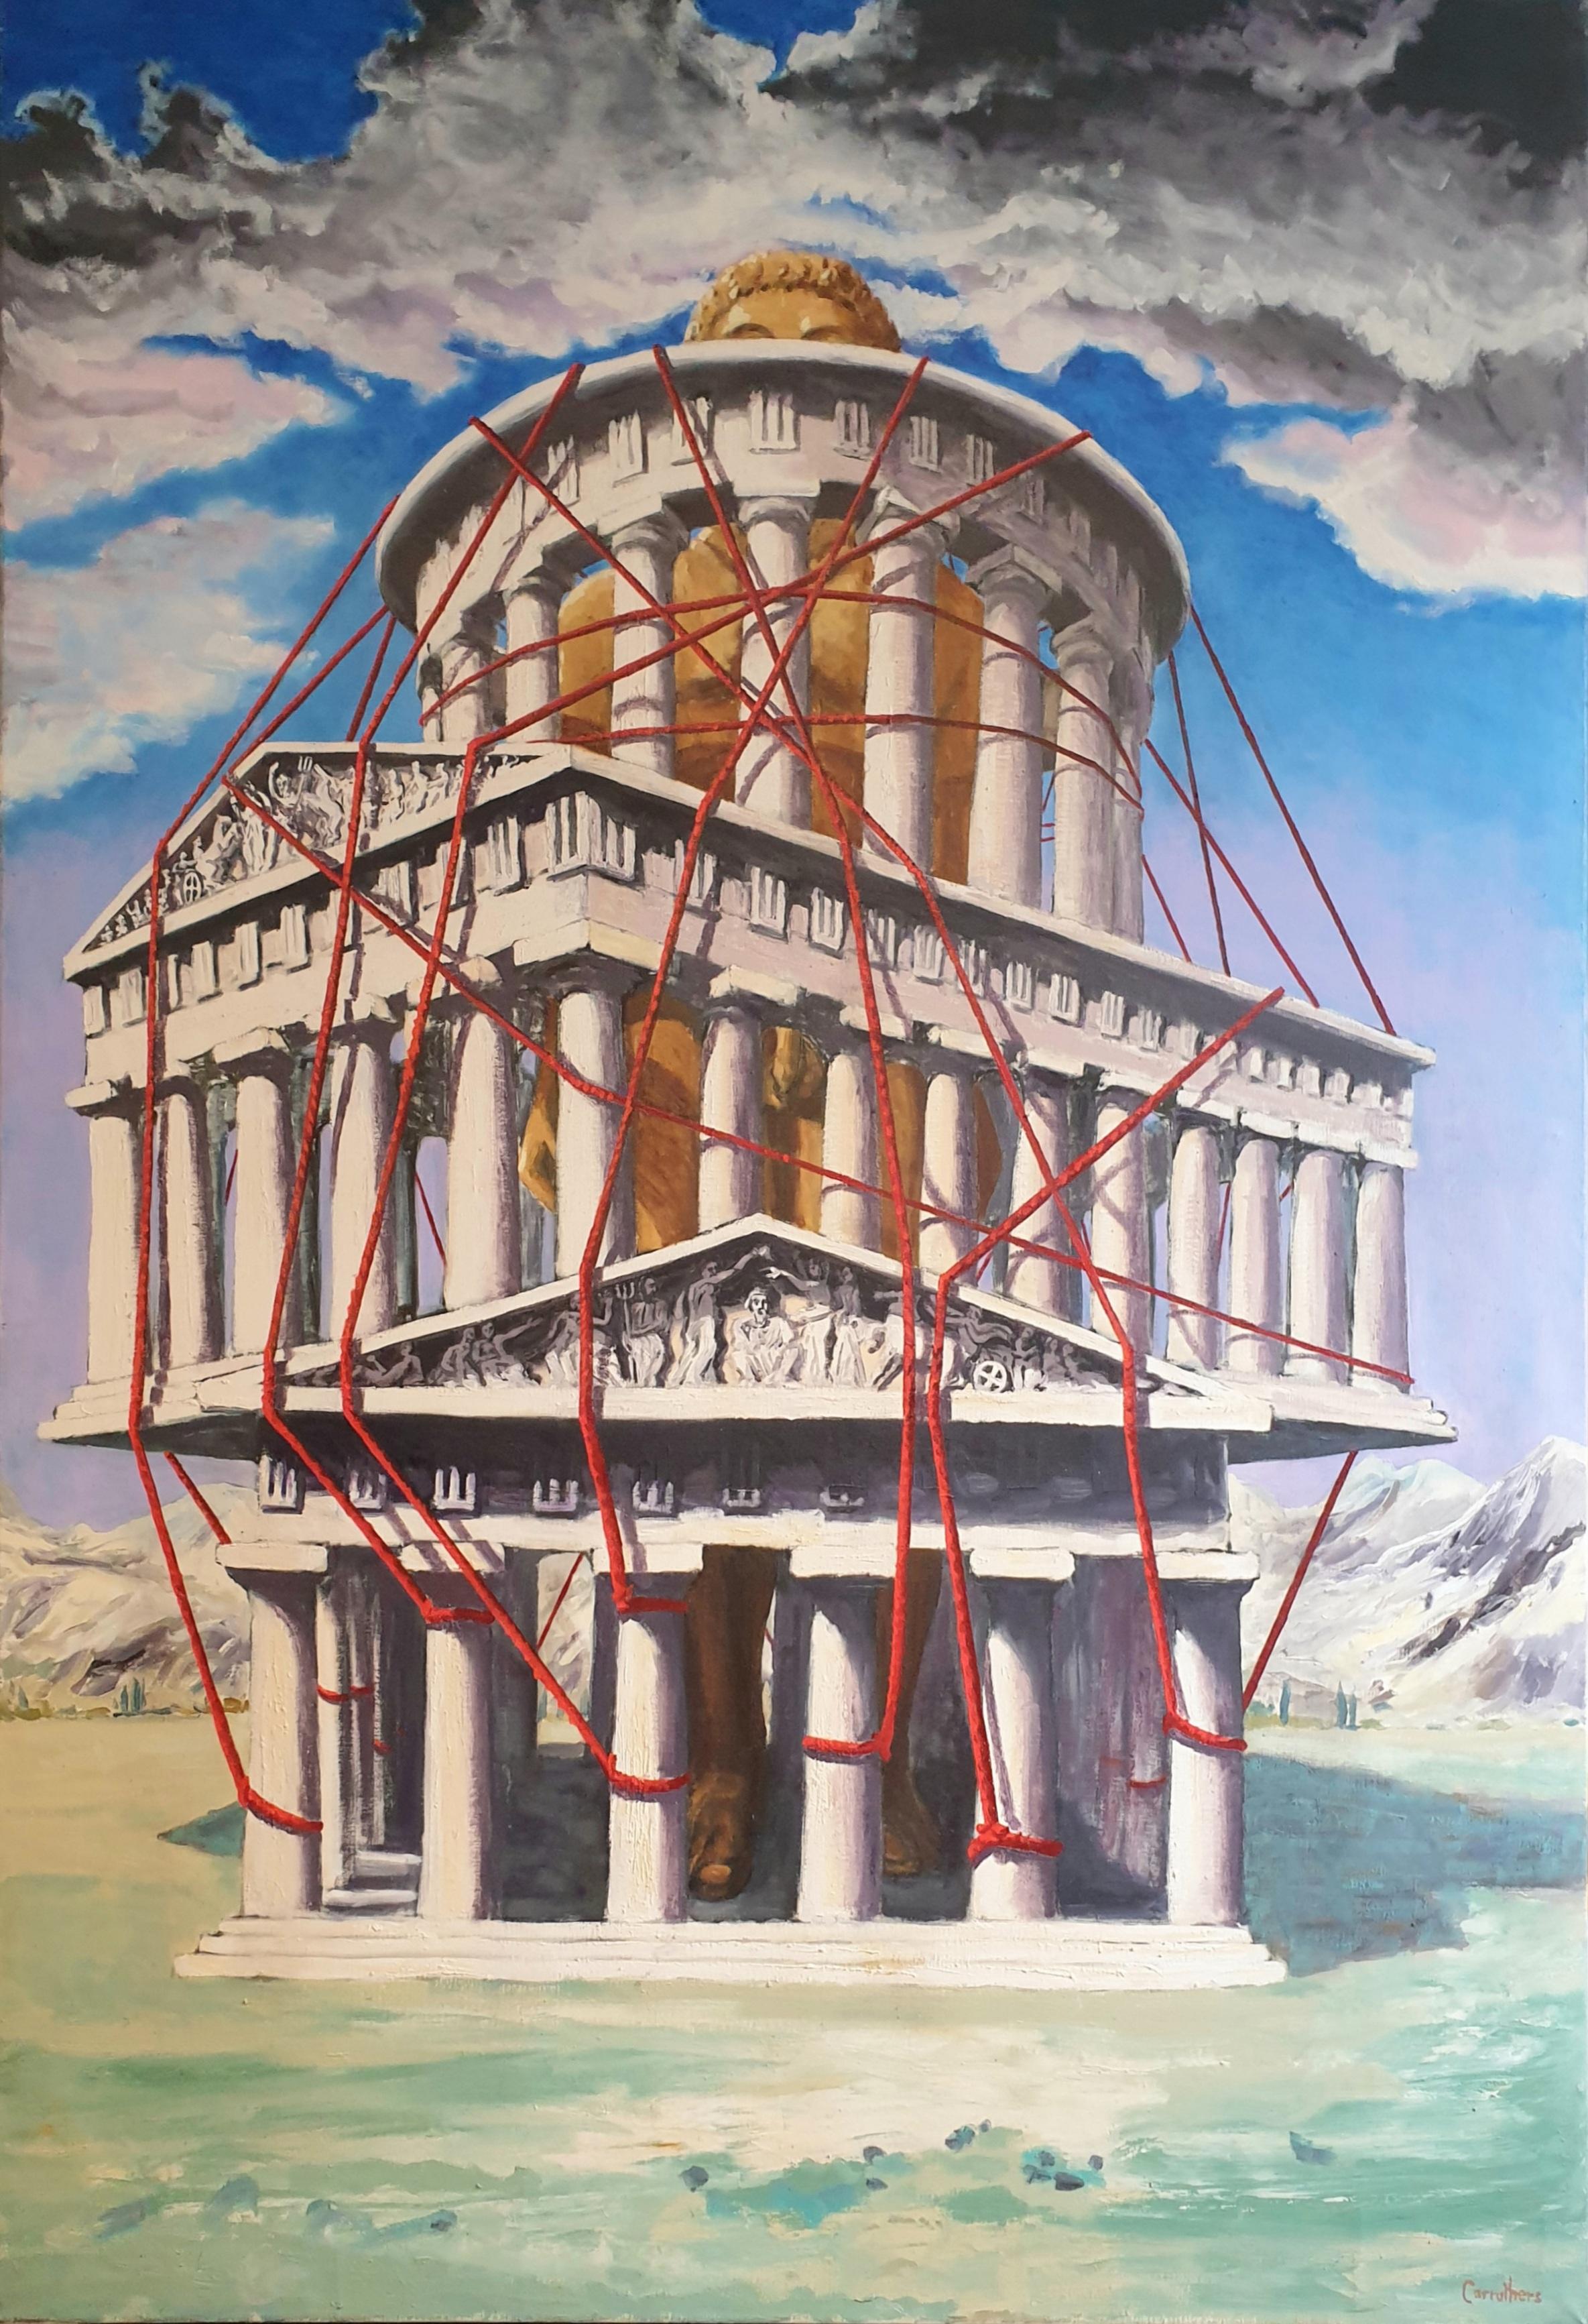 Derek Carruthers  Figurative Painting - Surrealist Very Large Late 20th Century Oil on Canvas. 'The Temple'. 